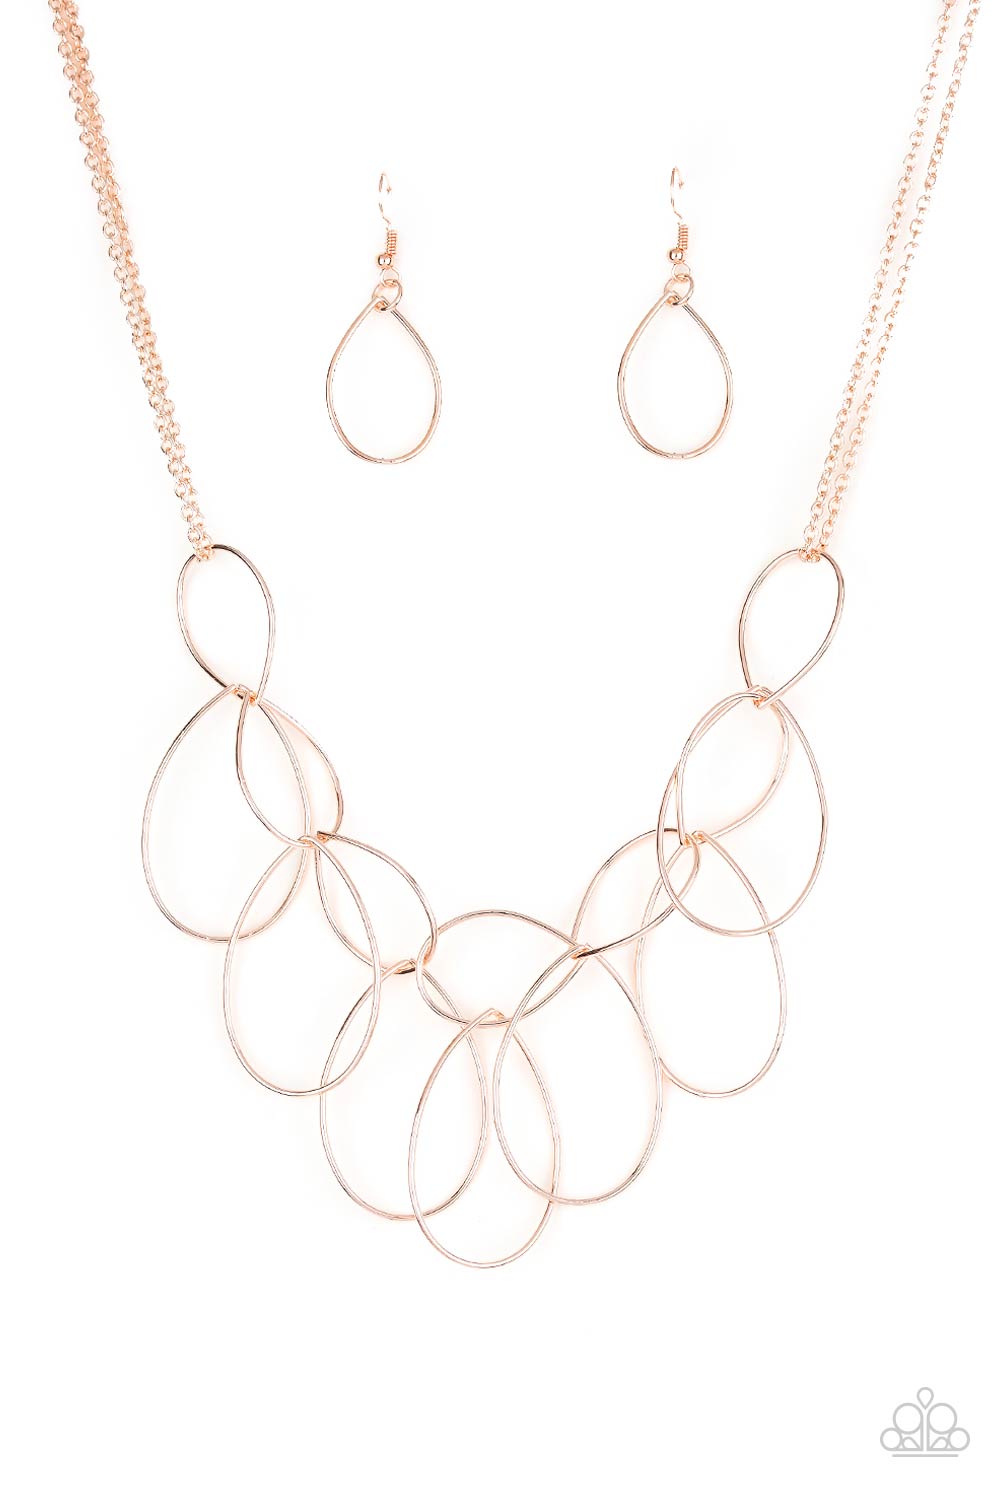 Paparazzi Necklaces - Top Tear Fashion - Rose Gold